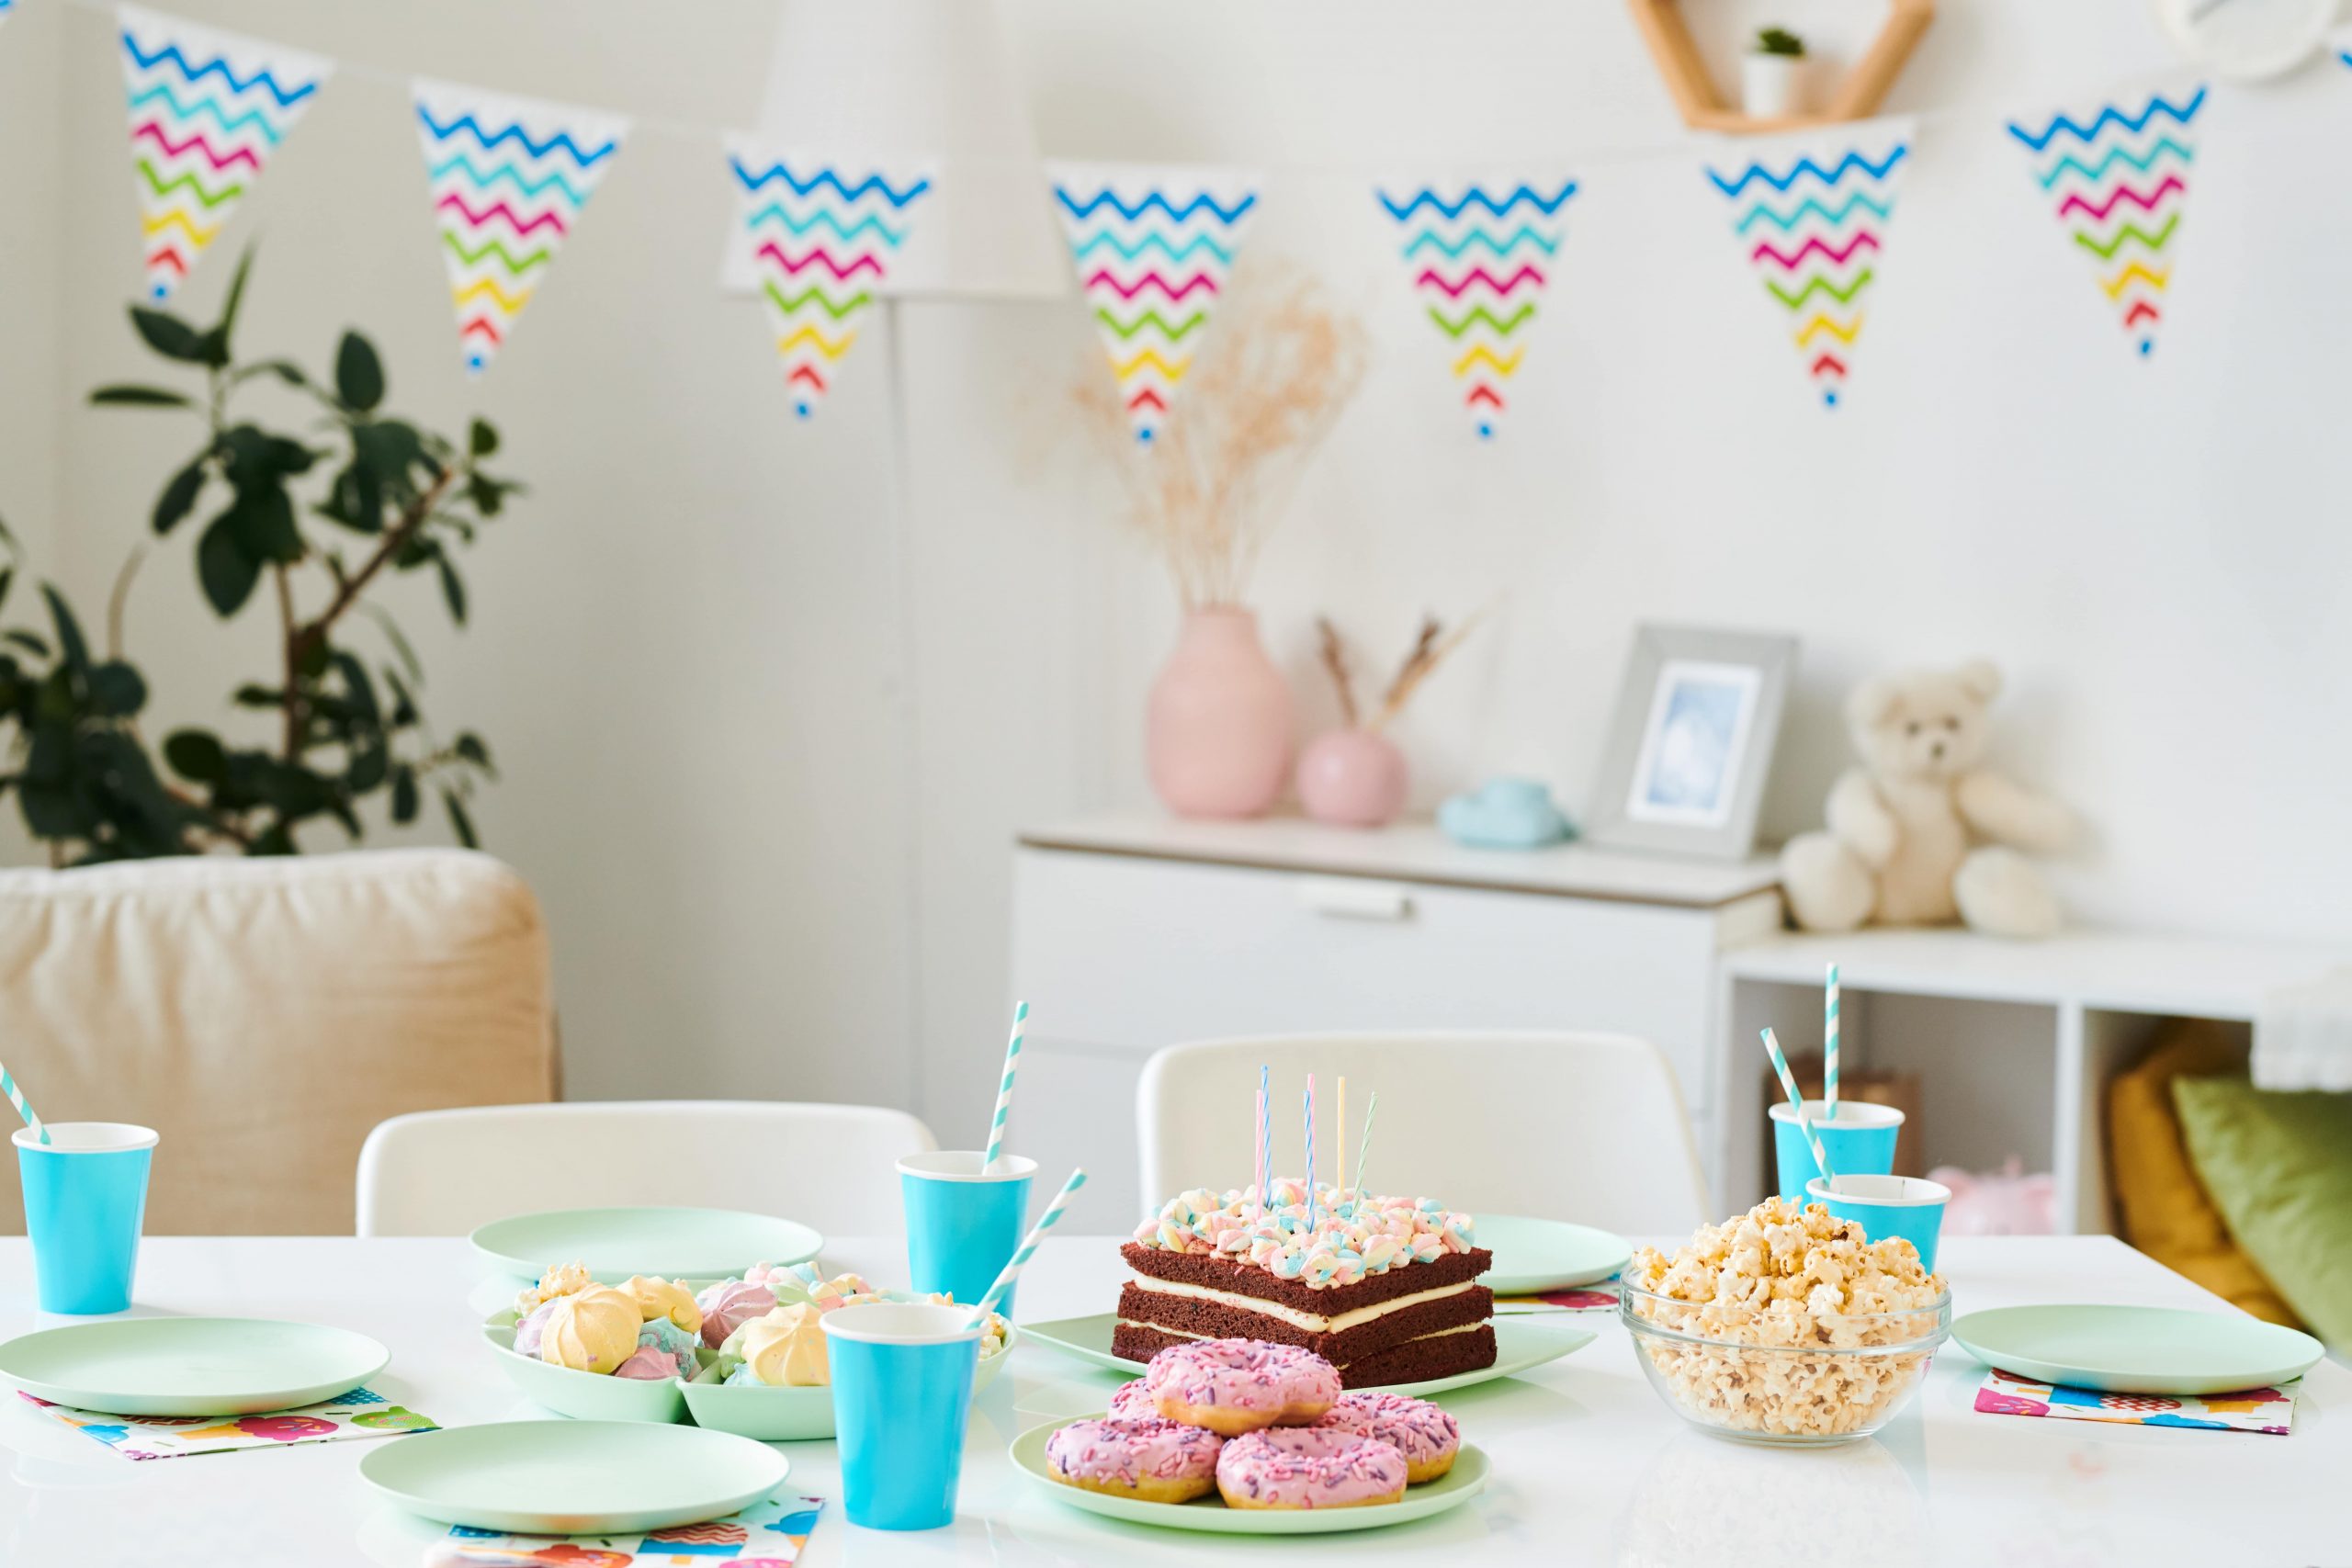 Preparing Your Home for a Kids Party